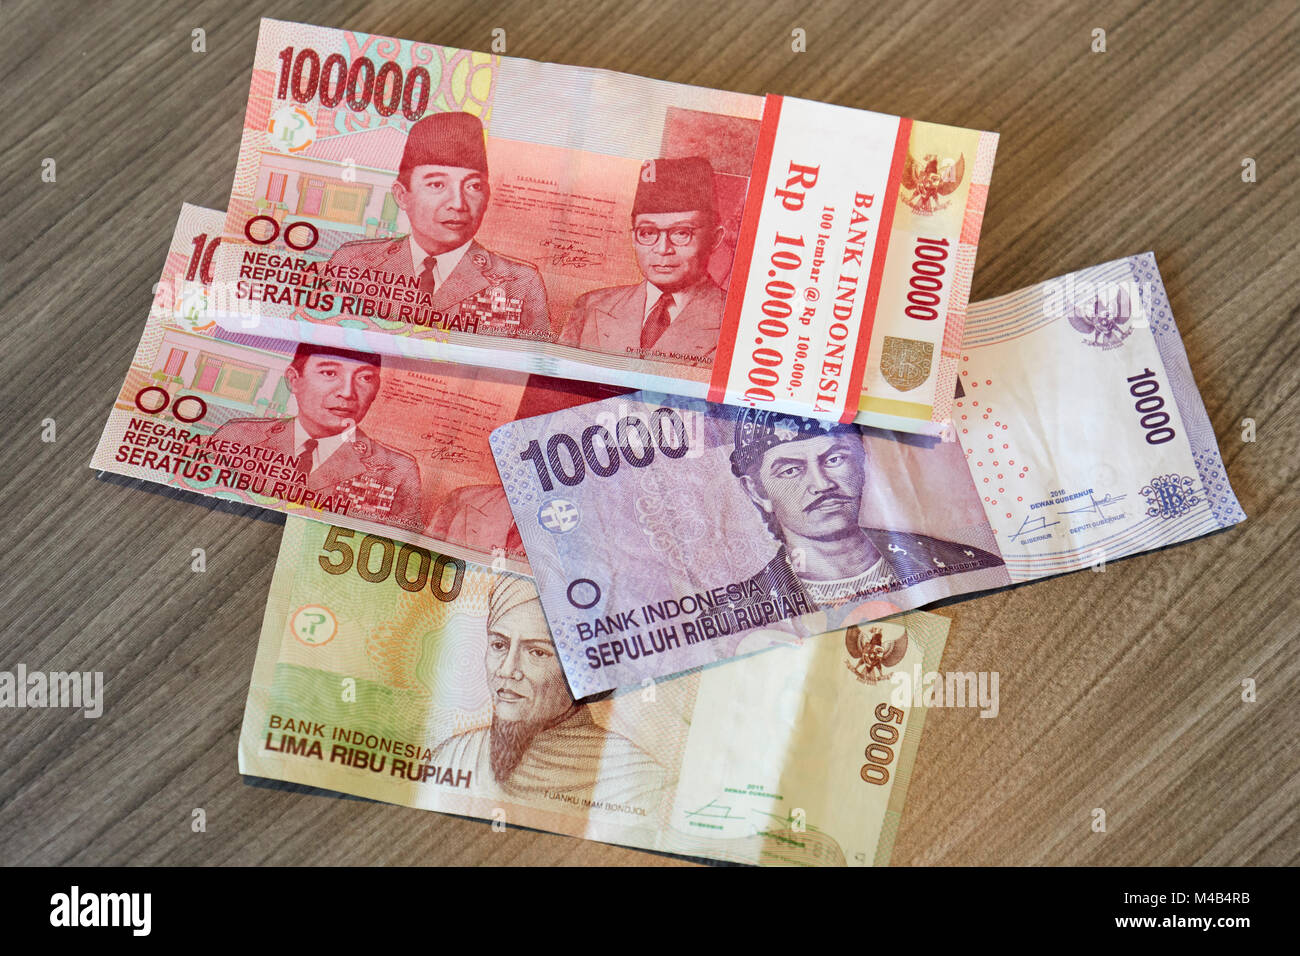 Indonesian banknotes with different face values laying on a table. Yogyakarta, Java, Indonesia. Stock Photo